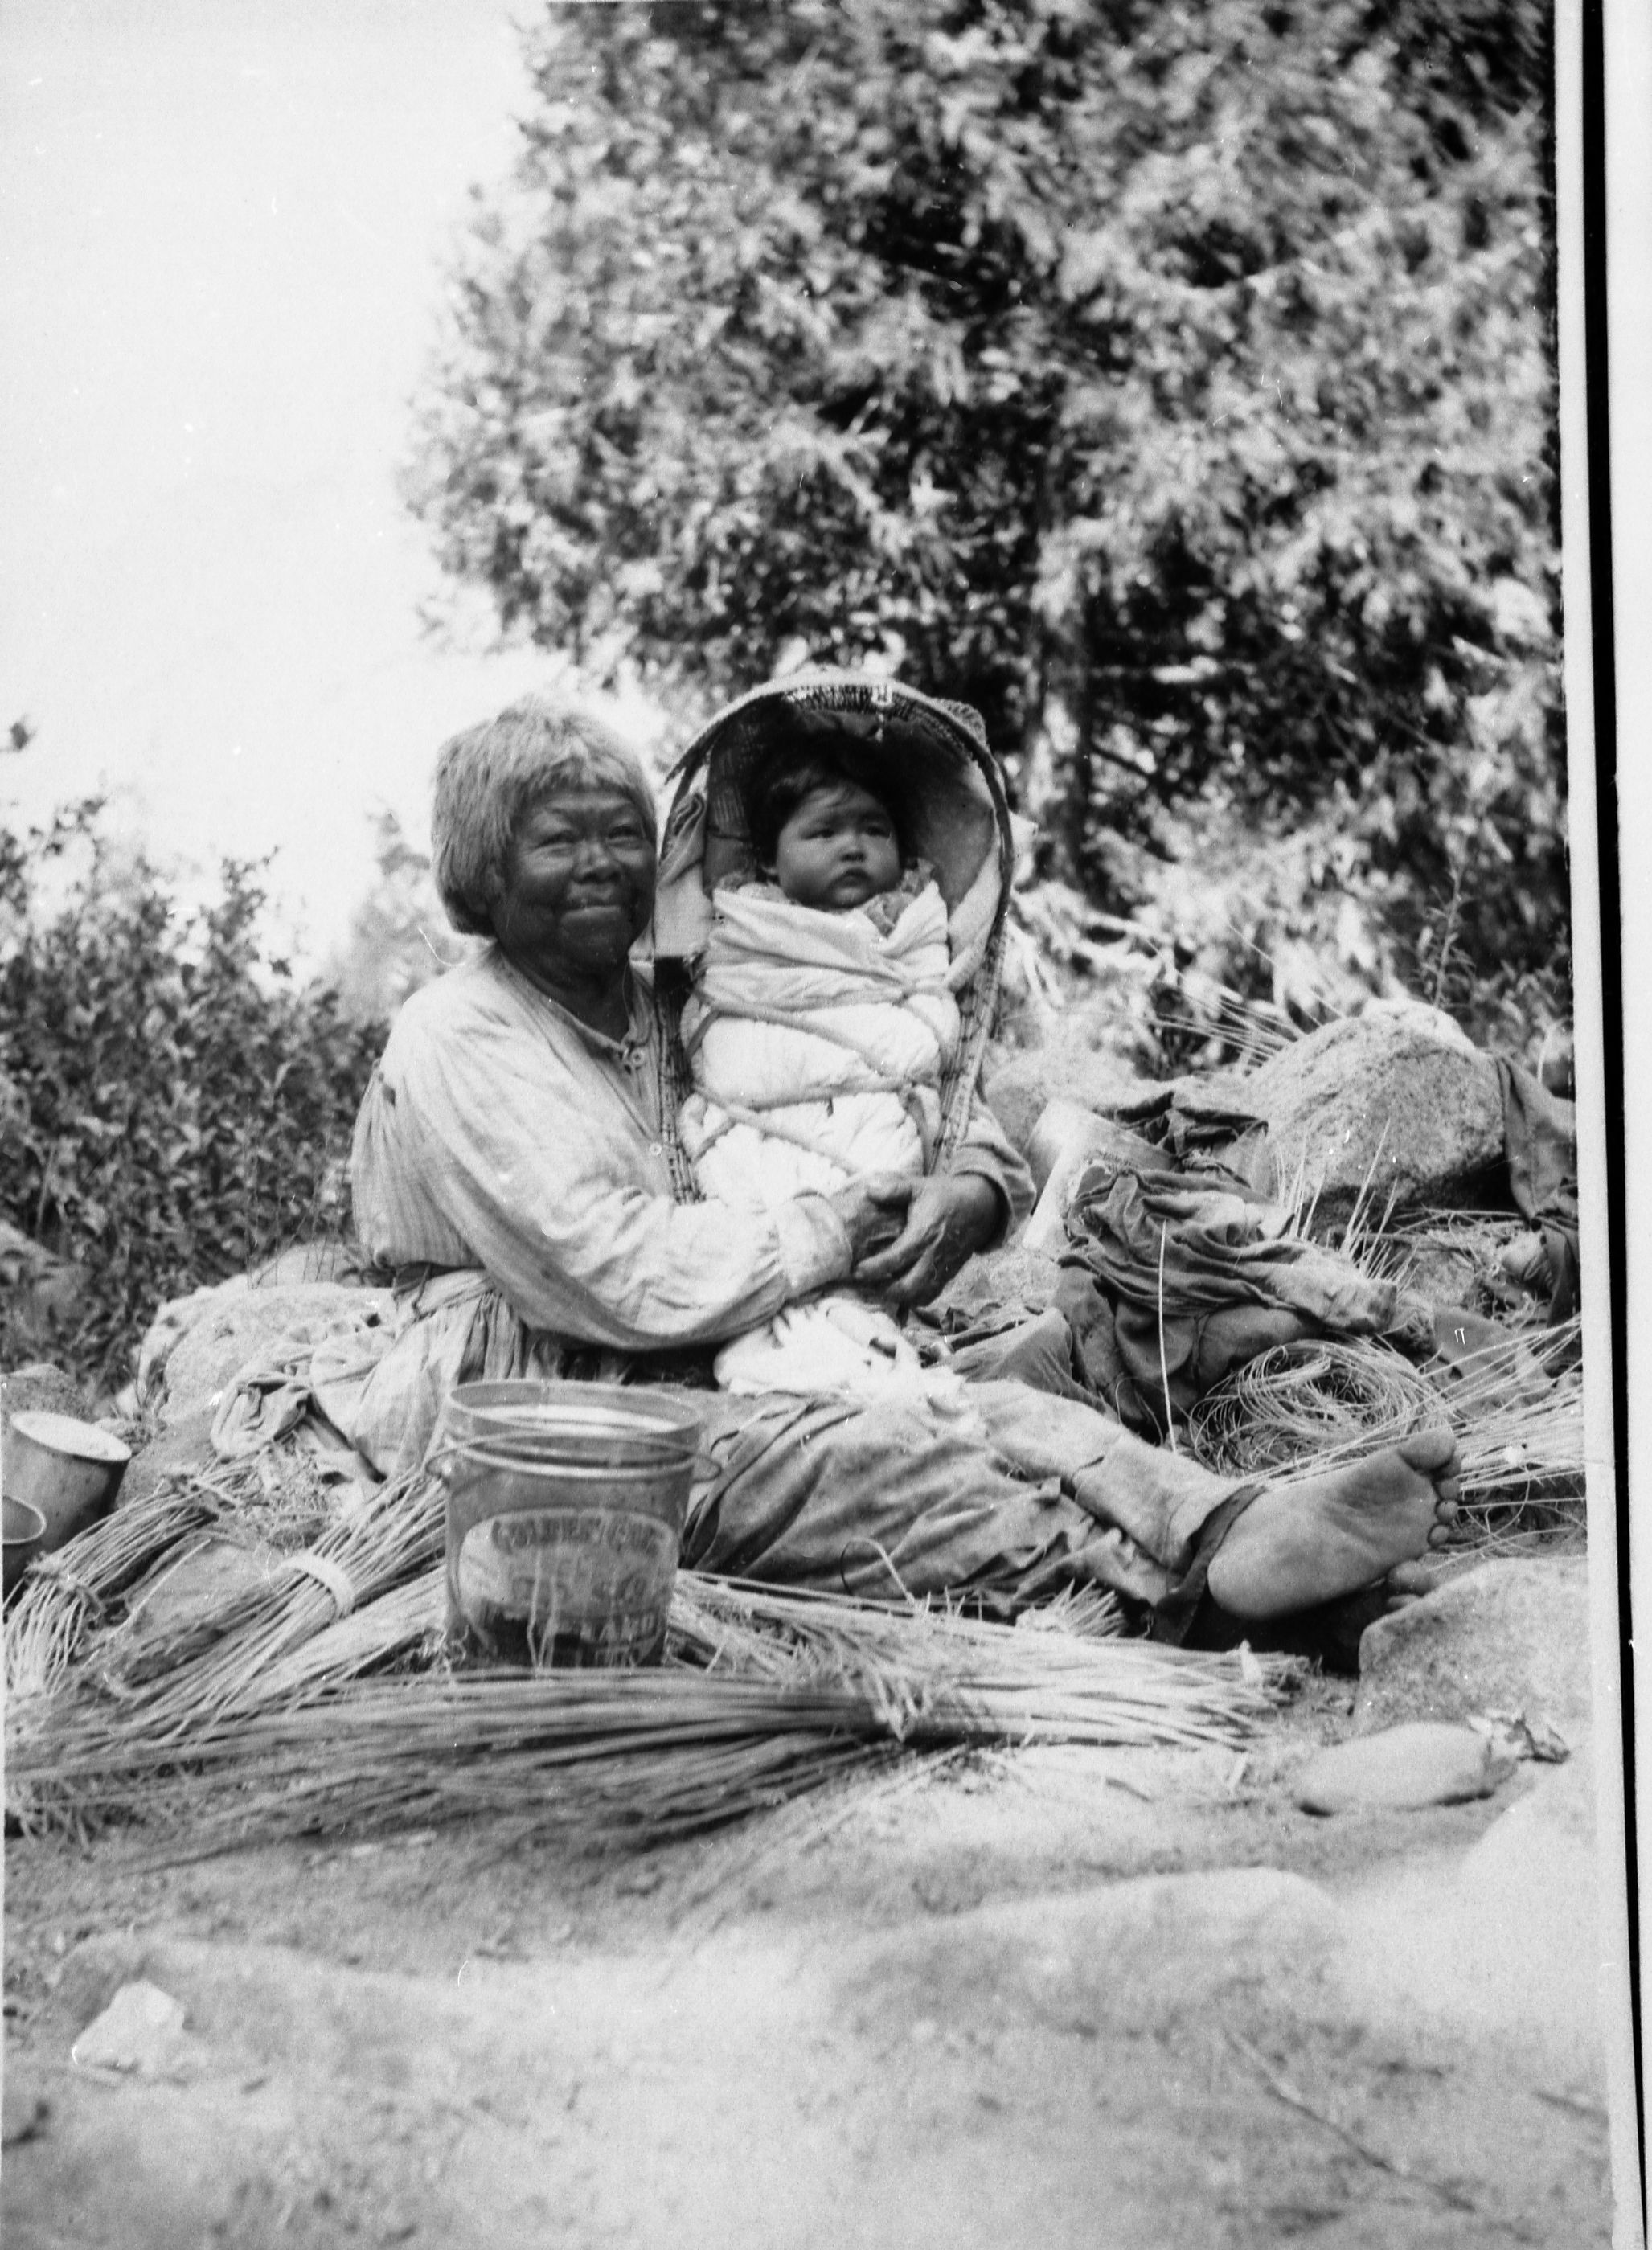 Lucy Brown surrounded by basket materials and Great Granddaughter Alice Roosevelt Wilson in a Miwok cradleboard. (Fig. 262, p. 140 Traditions & Innovations).